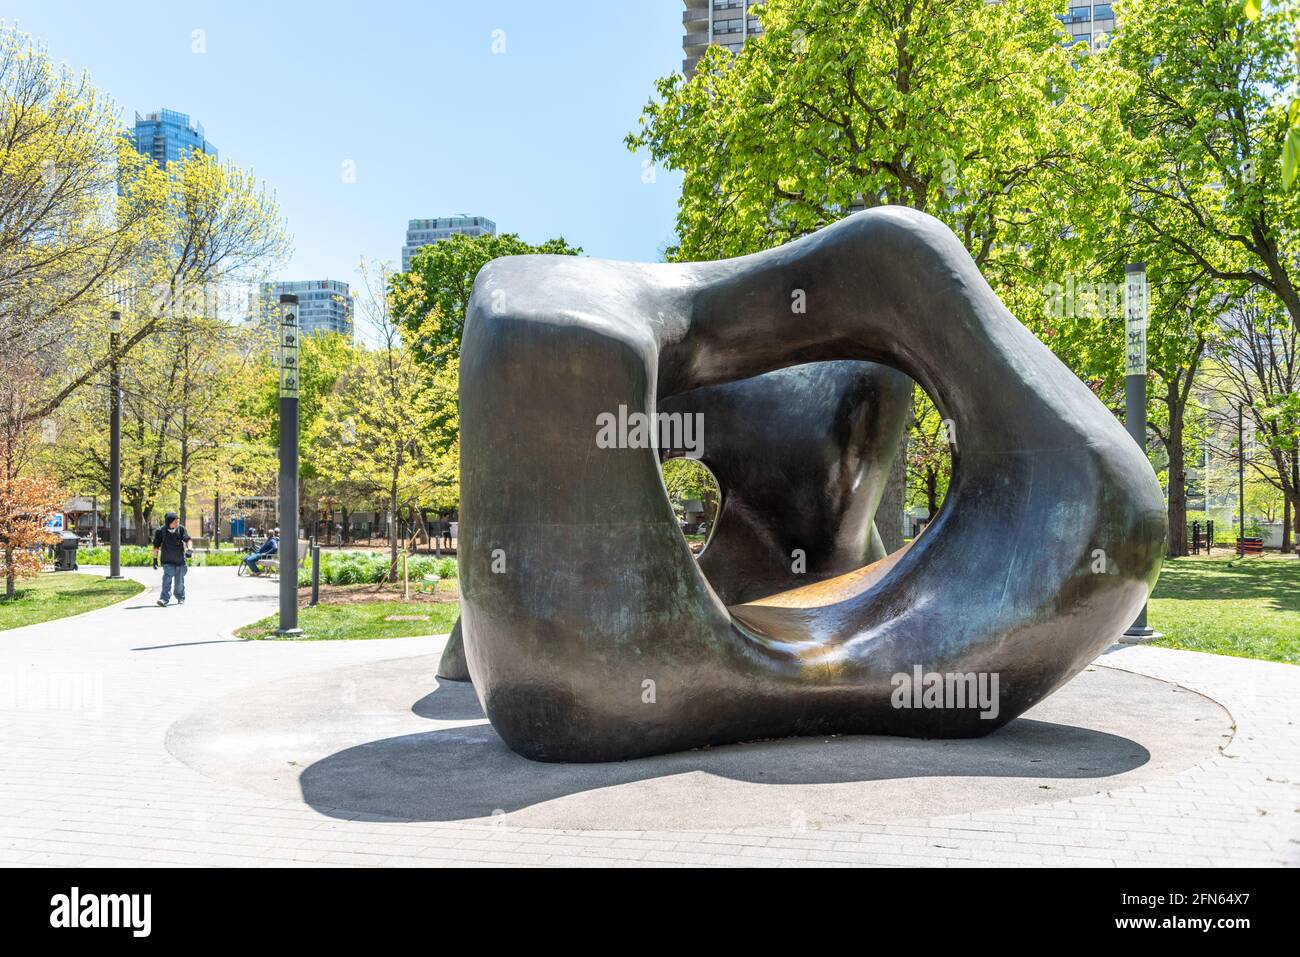 The sculpture is named 'Large Two Forms' by Henry Moore. It is located in The Grange Park behind the Art Gallery of Ontario (AGO) in Toronto, Canada Stock Photo